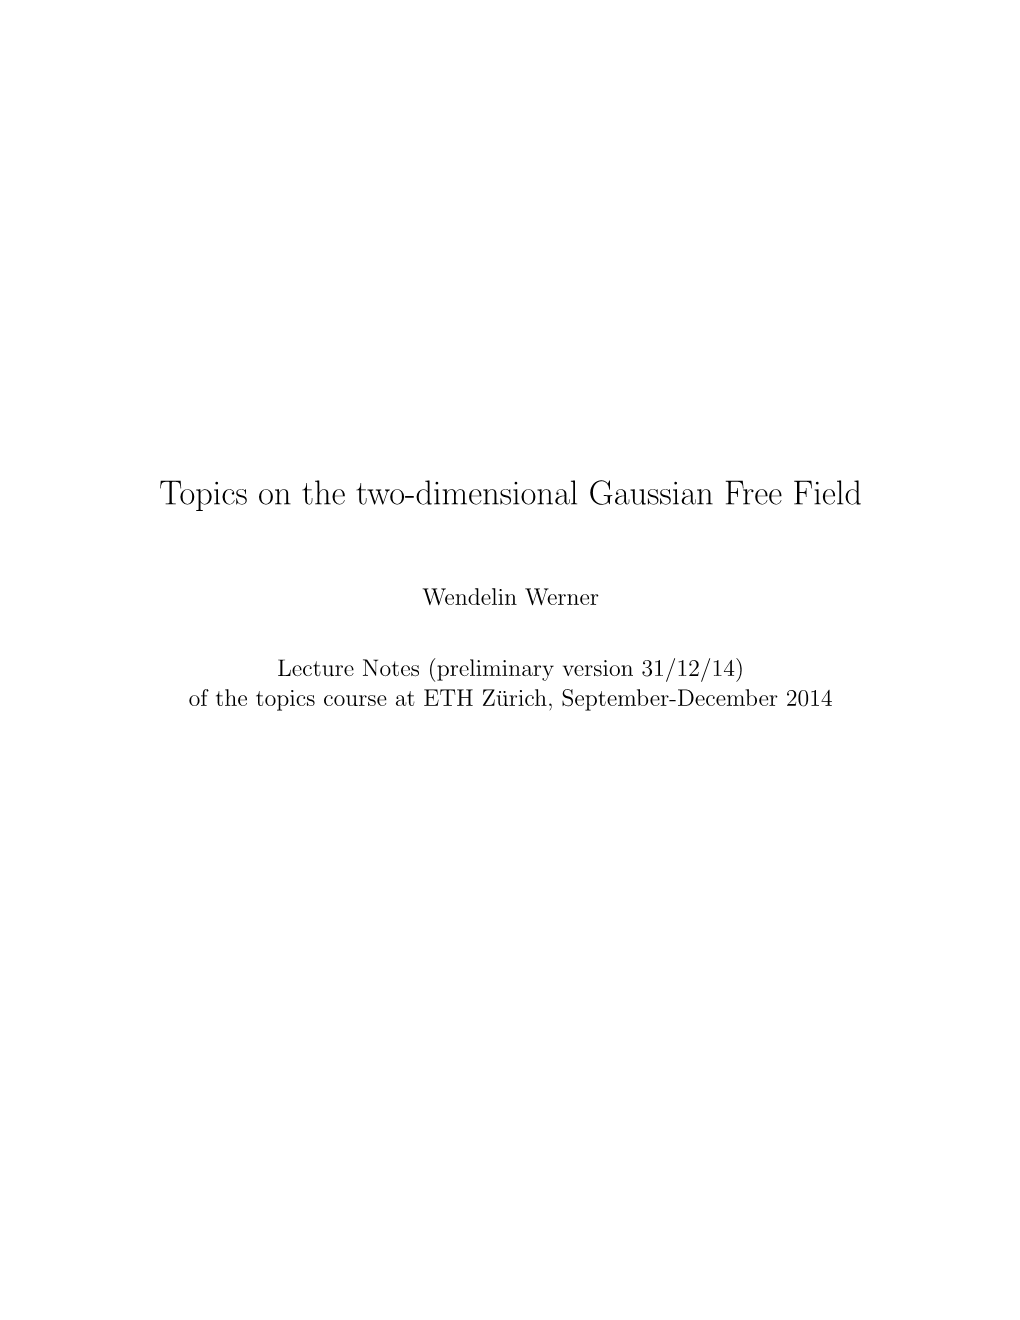 Topics on the Two-Dimensional Gaussian Free Field